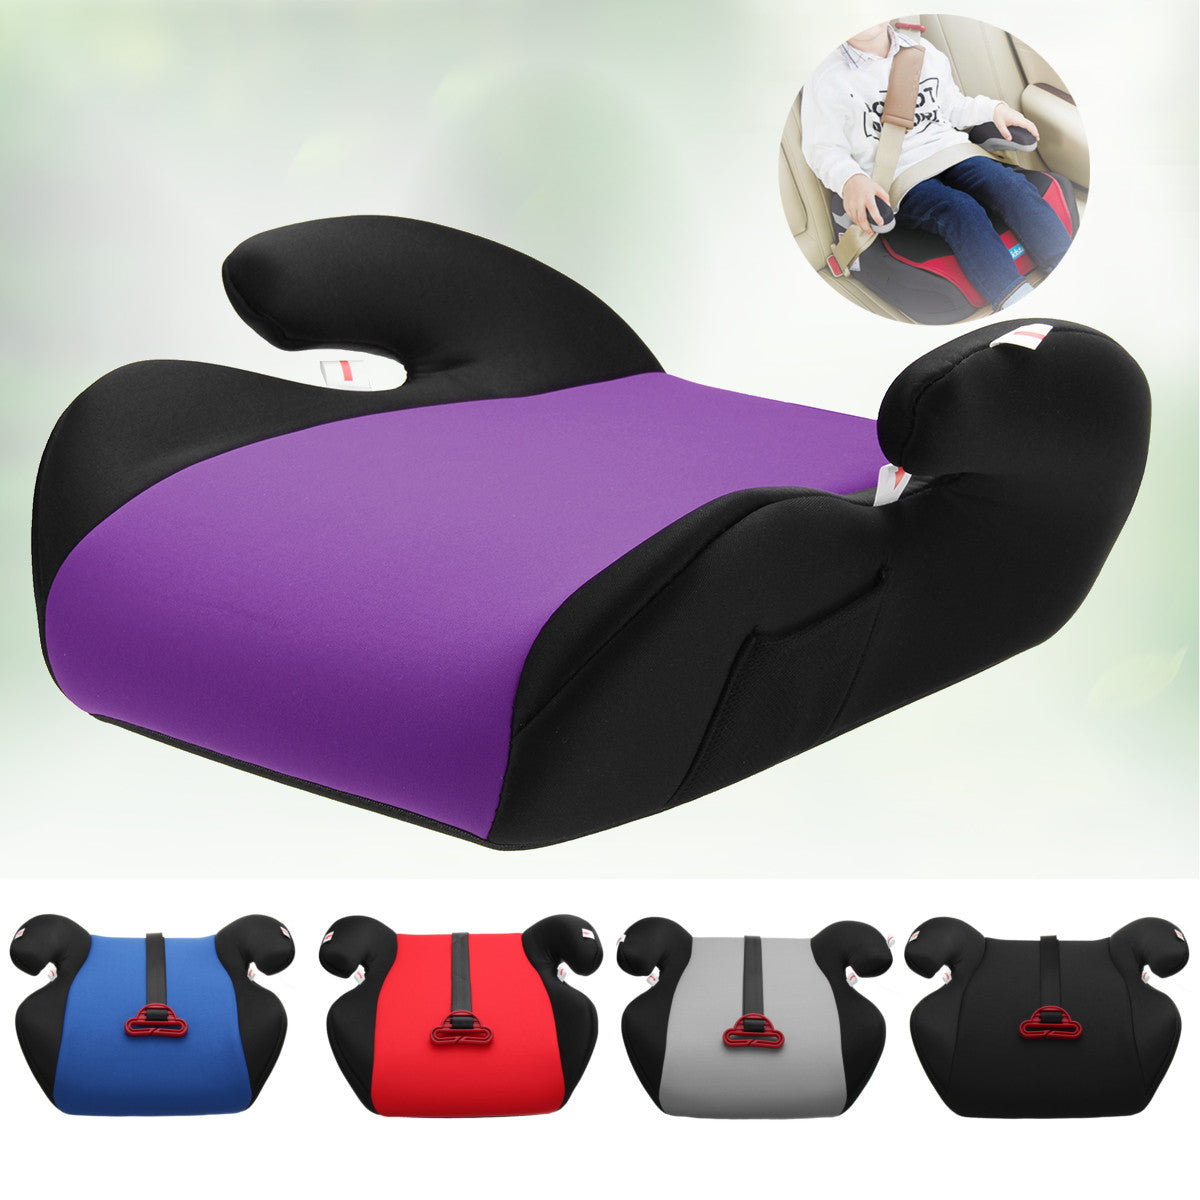 Anti-slip Portable Car Child Booster Seat Toddler Baby Safty Seat Fits 6-12 Years Old KidsTravel Pad - Auto GoShop